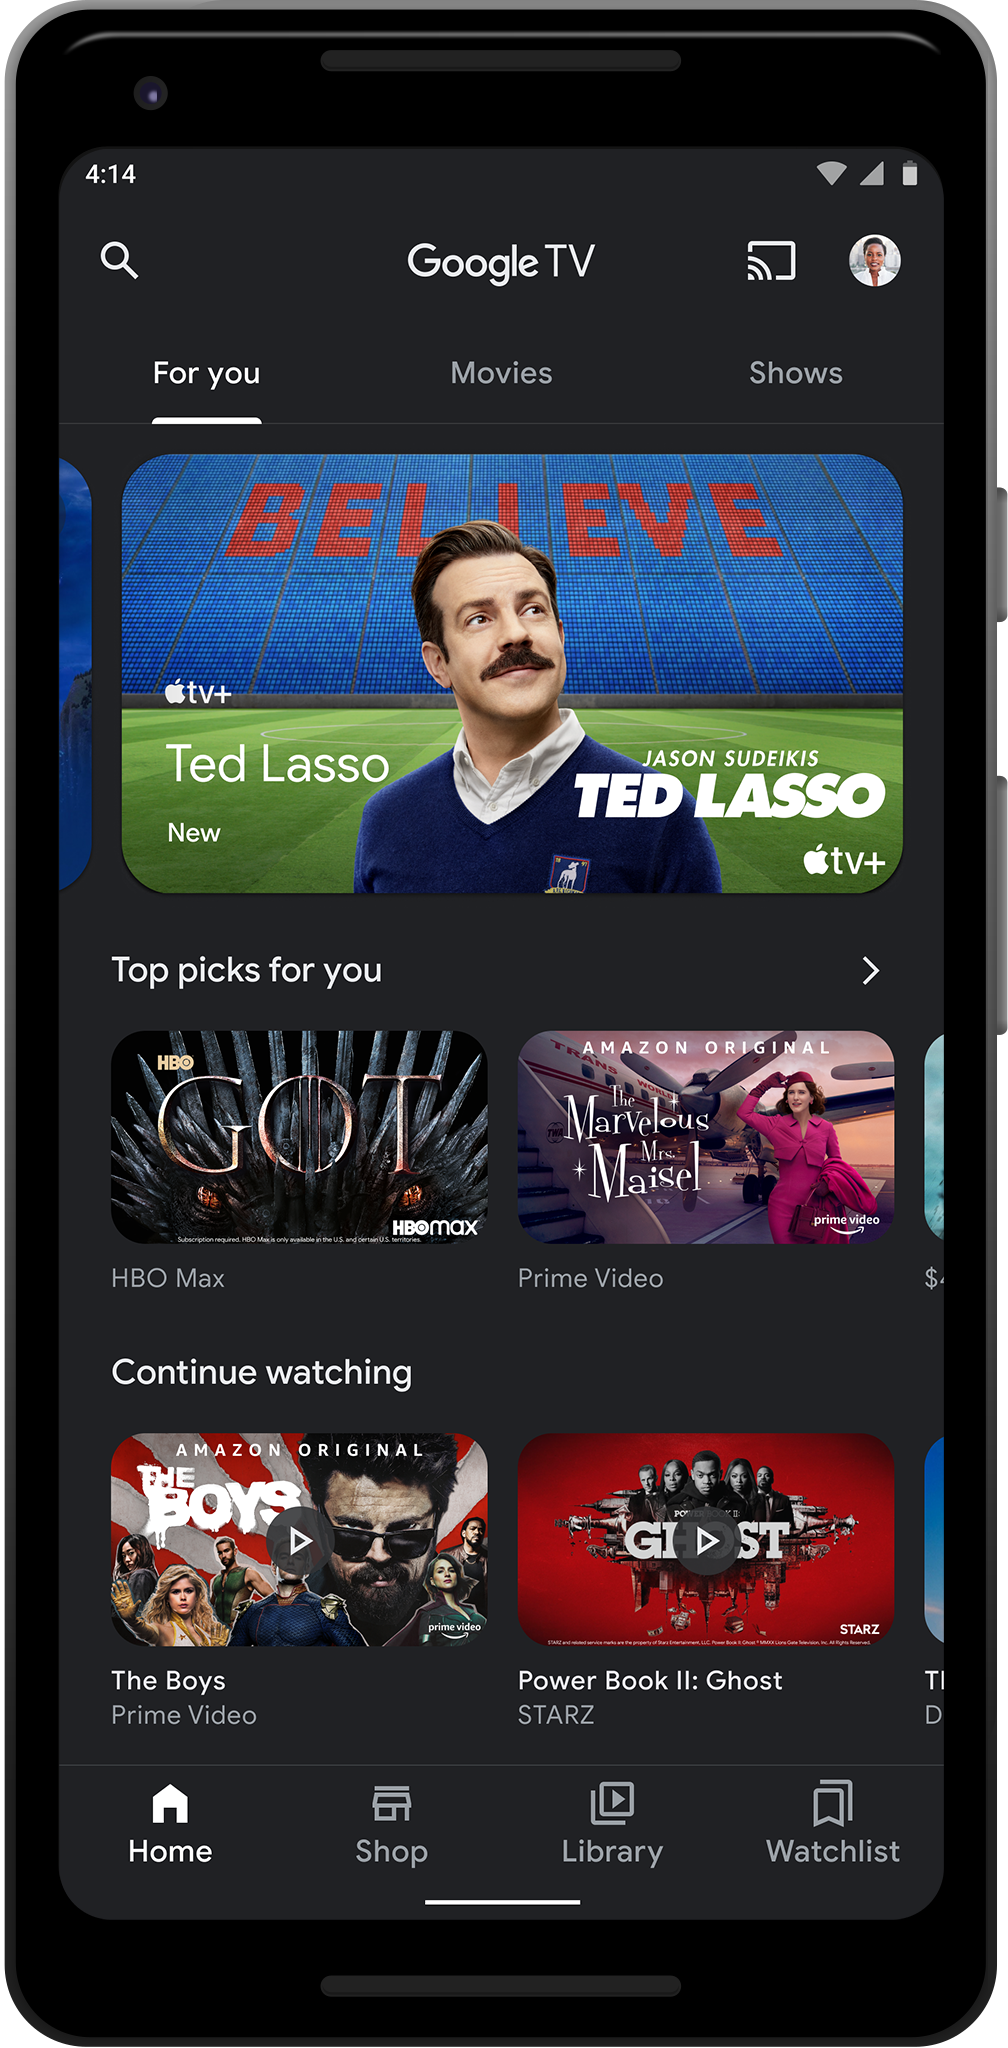 Updated] Google TV Android App Launch - Google Play Community